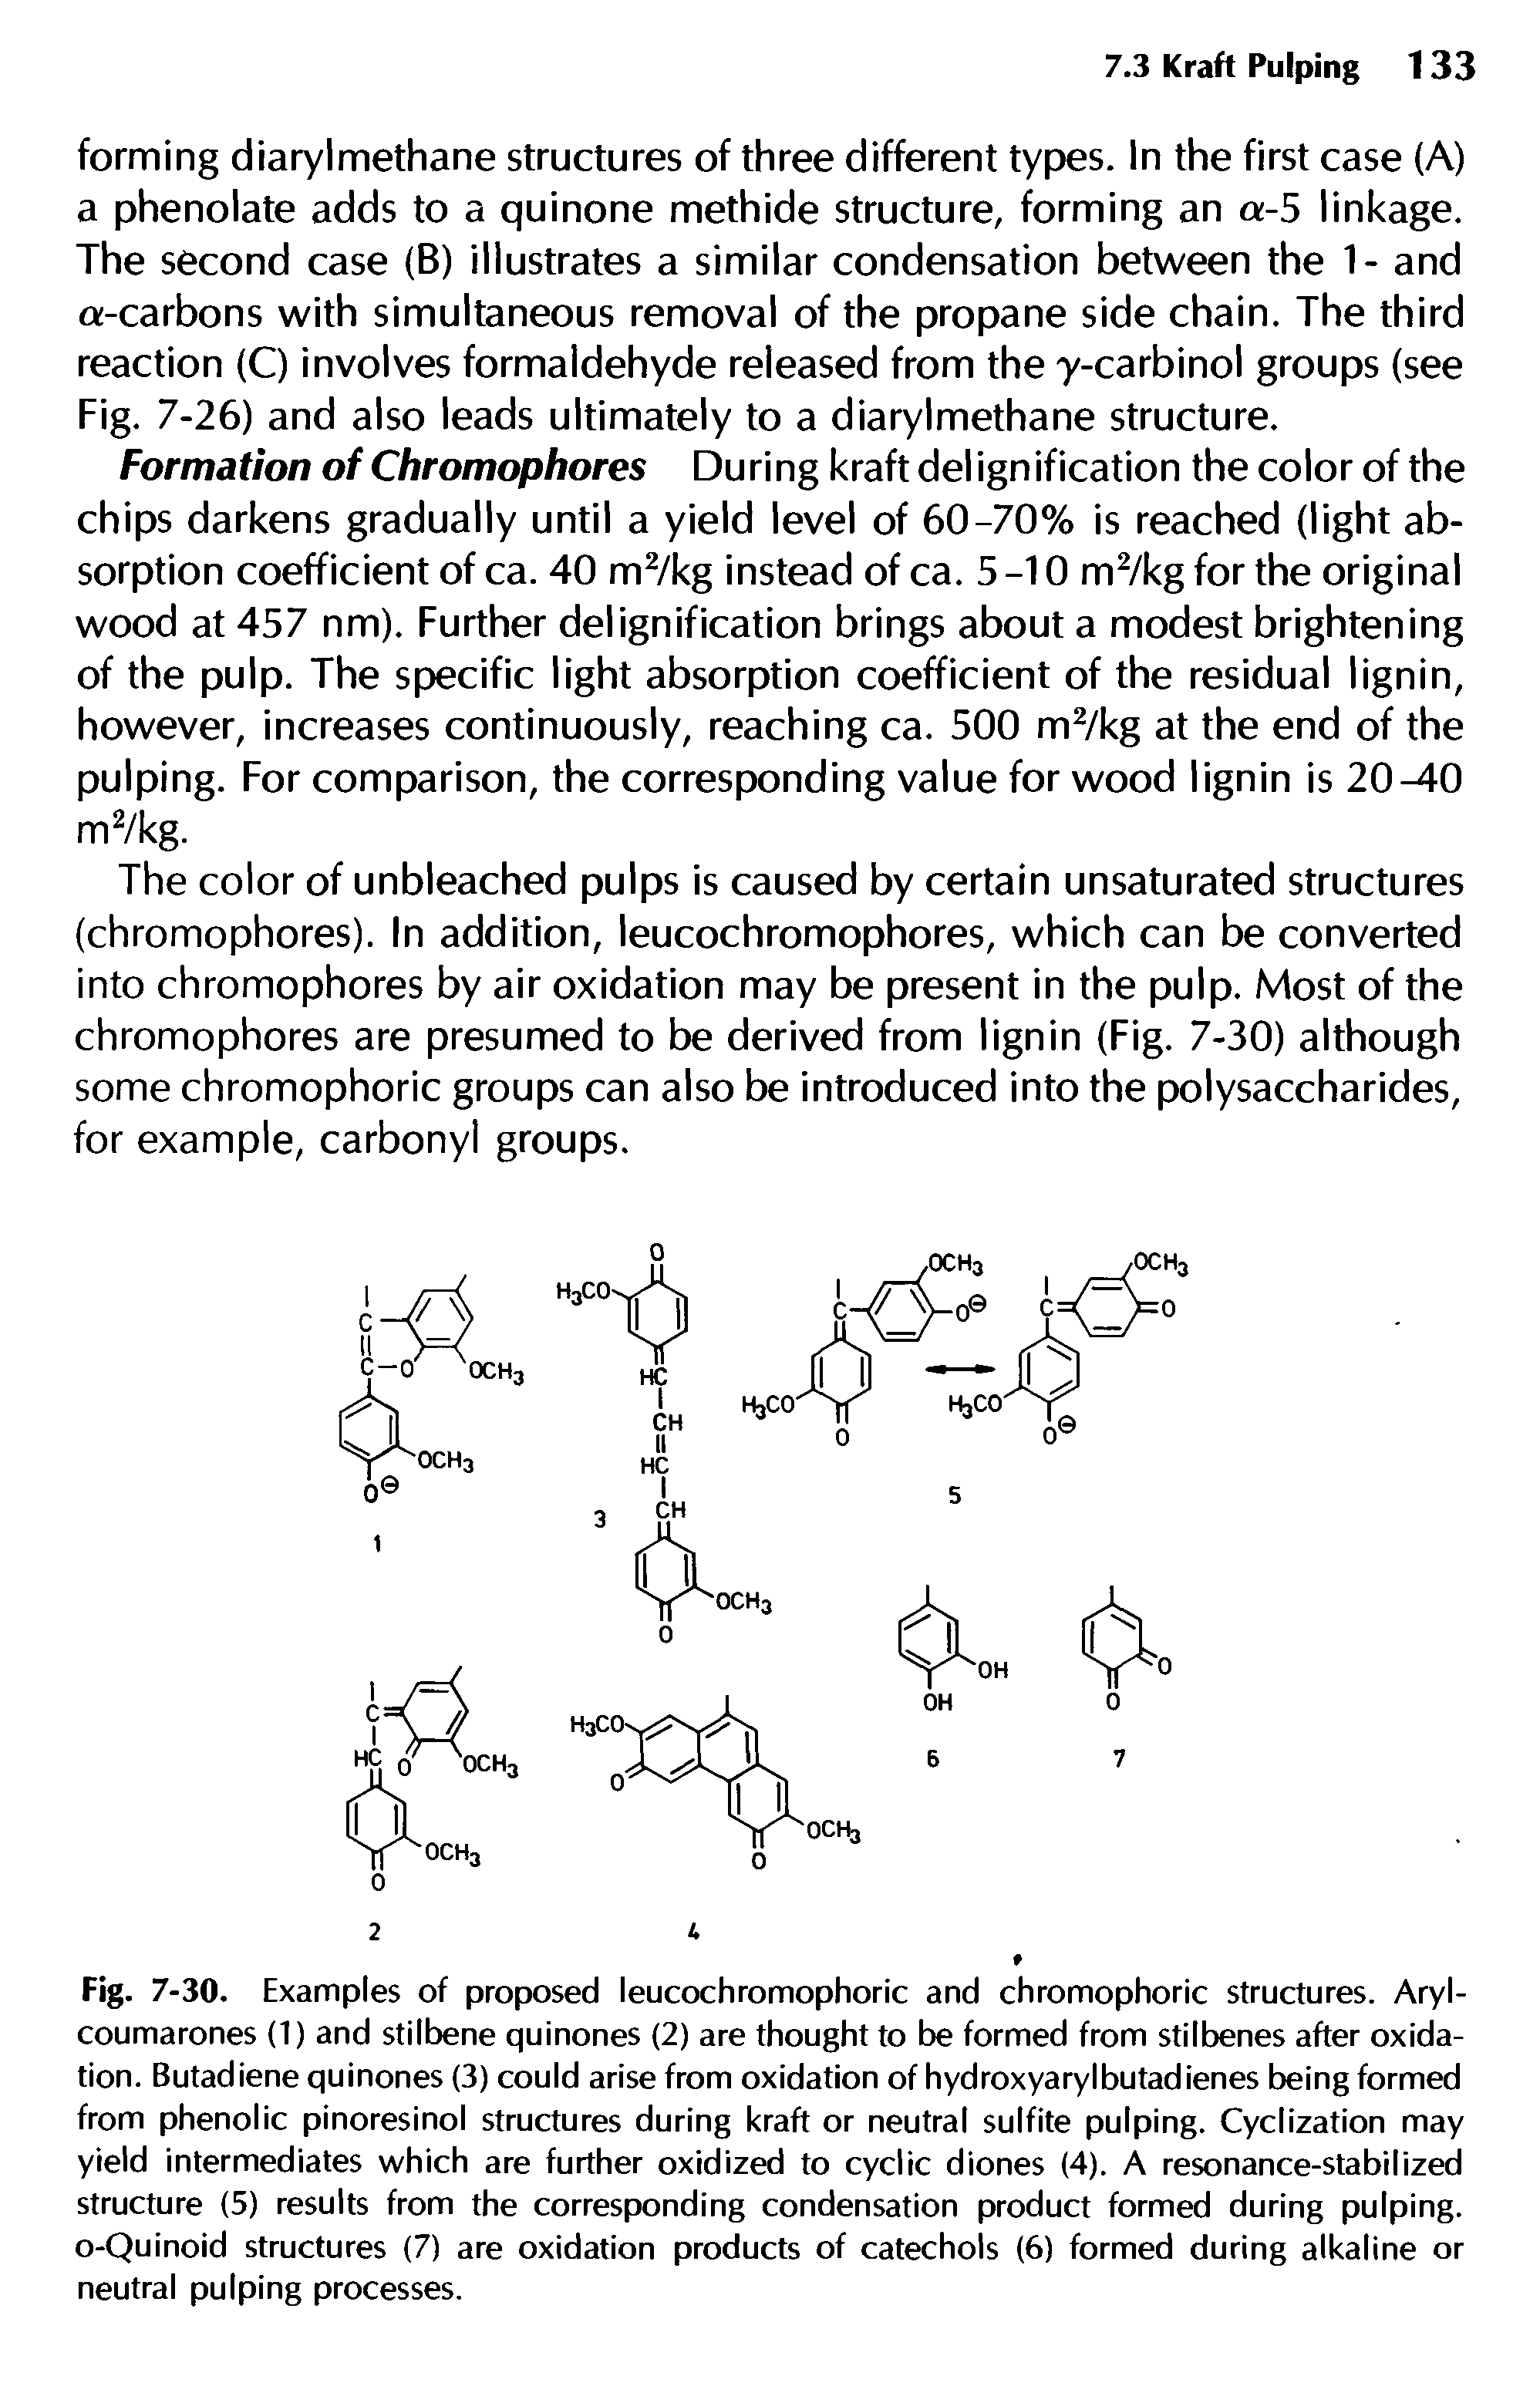 Fig. 7-30. Examples of proposed leucochromophoric and chromophoric structures. Aryl-coumarones (1) and stilbene quinones (2) are thought to be formed from stilbenes after oxidation. Butadiene quinones (3) could arise from oxidation of hydroxyarylbutadienes being formed from phenolic pinoresinol structures during kraft or neutral sulfite pulping. Cyclization may yield intermediates which are further oxidized to cyclic diones (4). A resonance-stabilized structure (5) results from the corresponding condensation product formed during pulping. o-Quinoid structures (7) are oxidation products of catechols (6) formed during alkaline or neutral pulping processes.